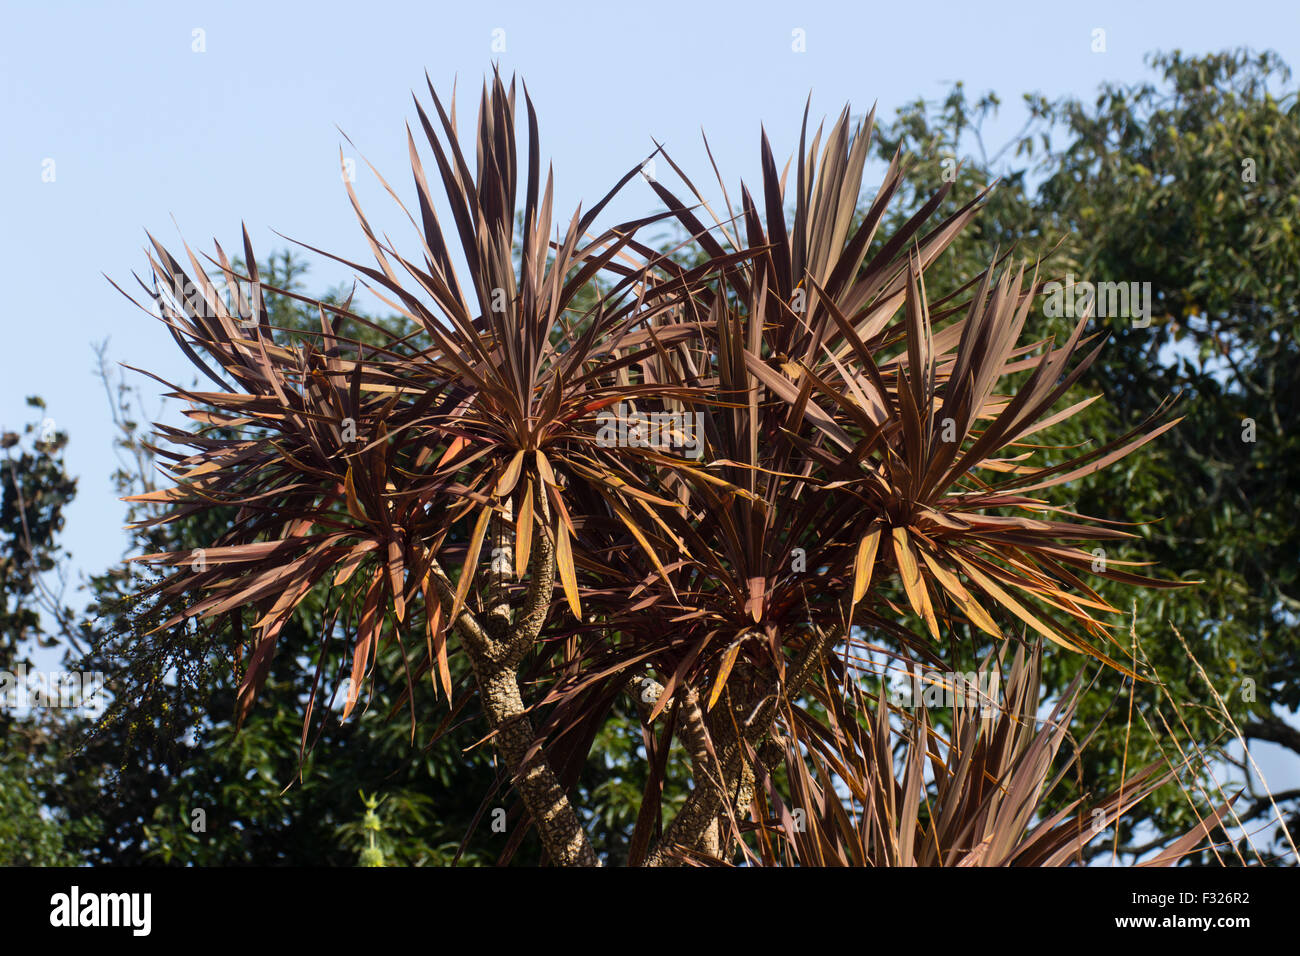 Multi-headed plant of the slightly tender cabbage palm, Cordyline australis 'Torbay Red' Stock Photo